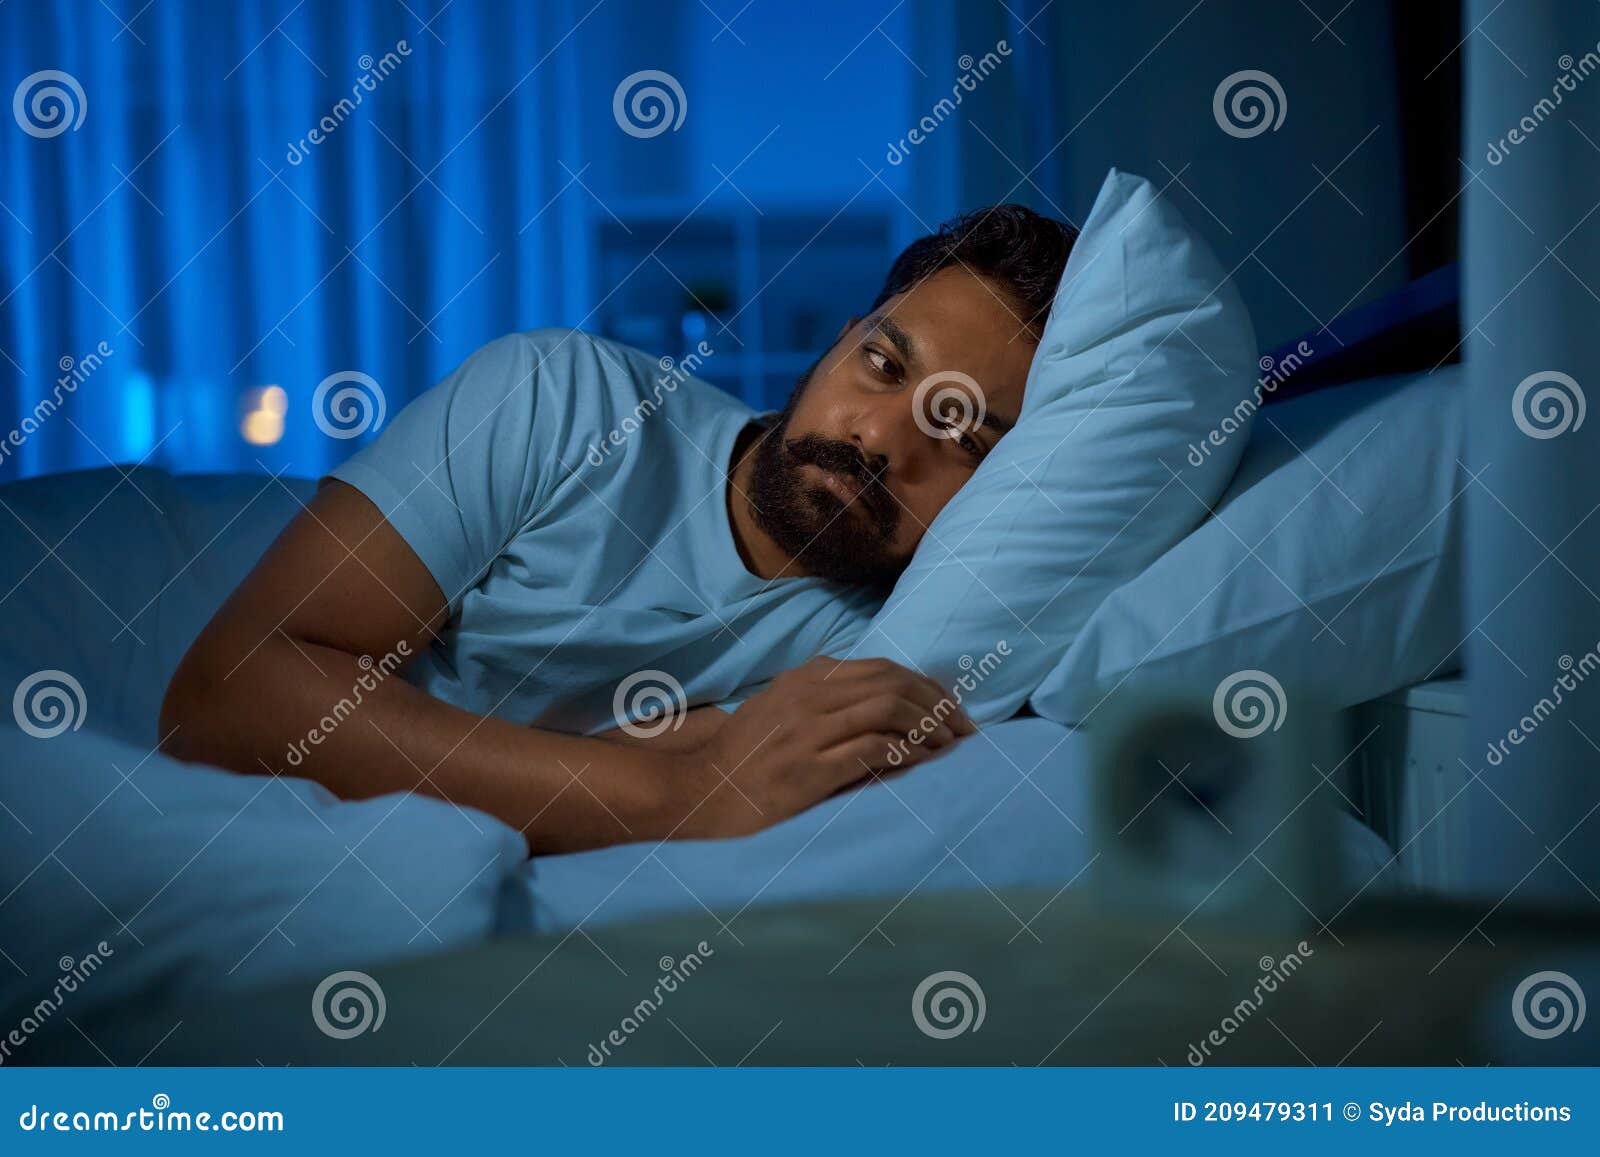 Sleepless Indian Man Lying in Bed at Night Stock Image - Image of ...